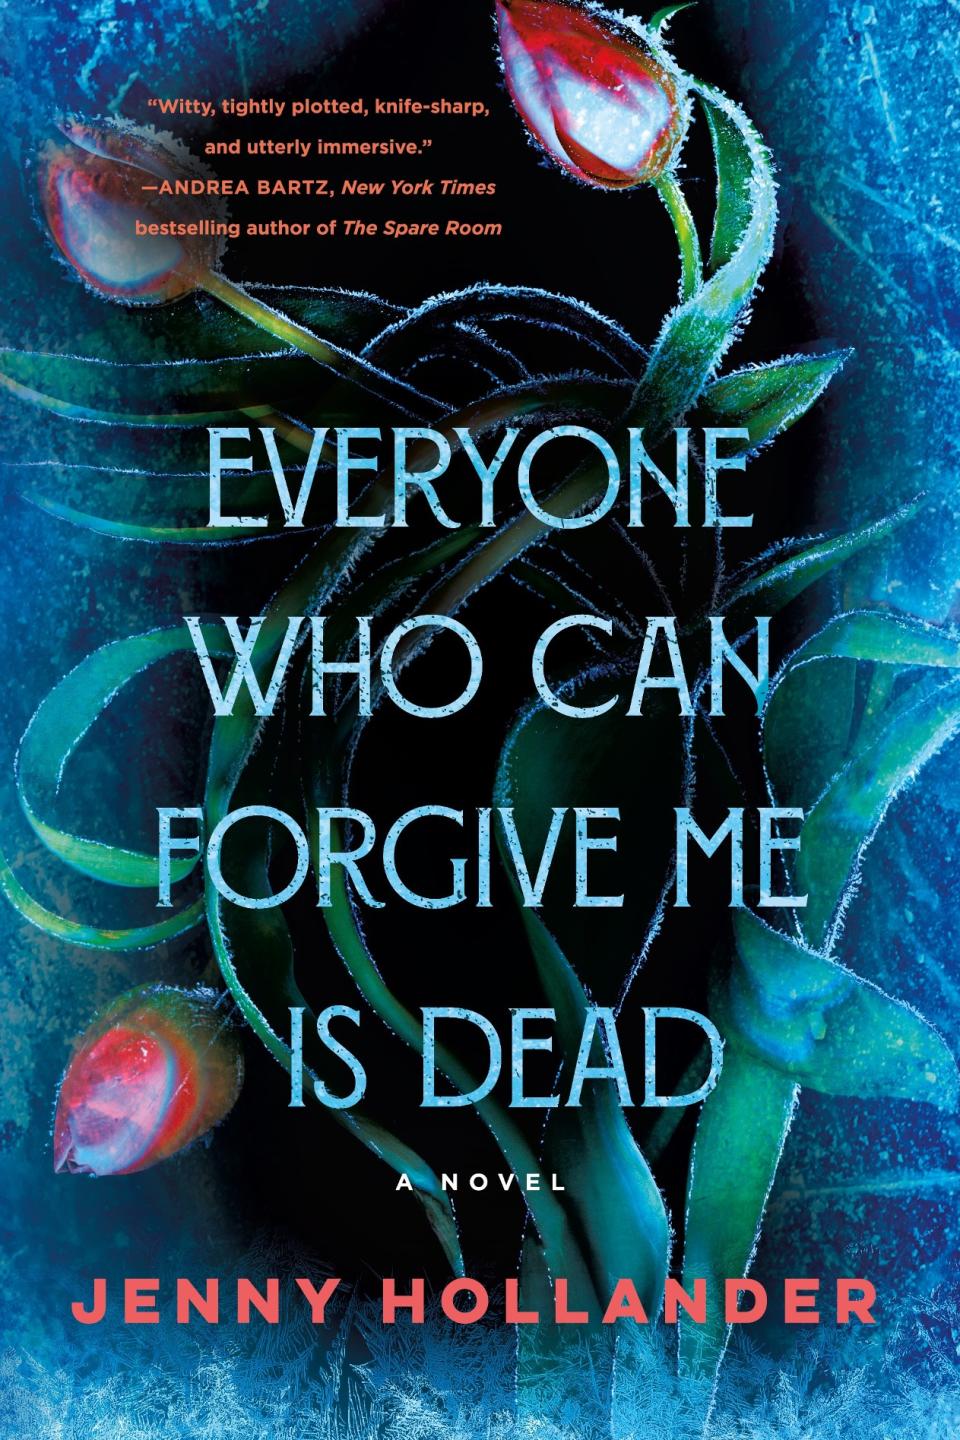 "Everyone Who Can Forgive Me Is Dead" by Jenny Hollander